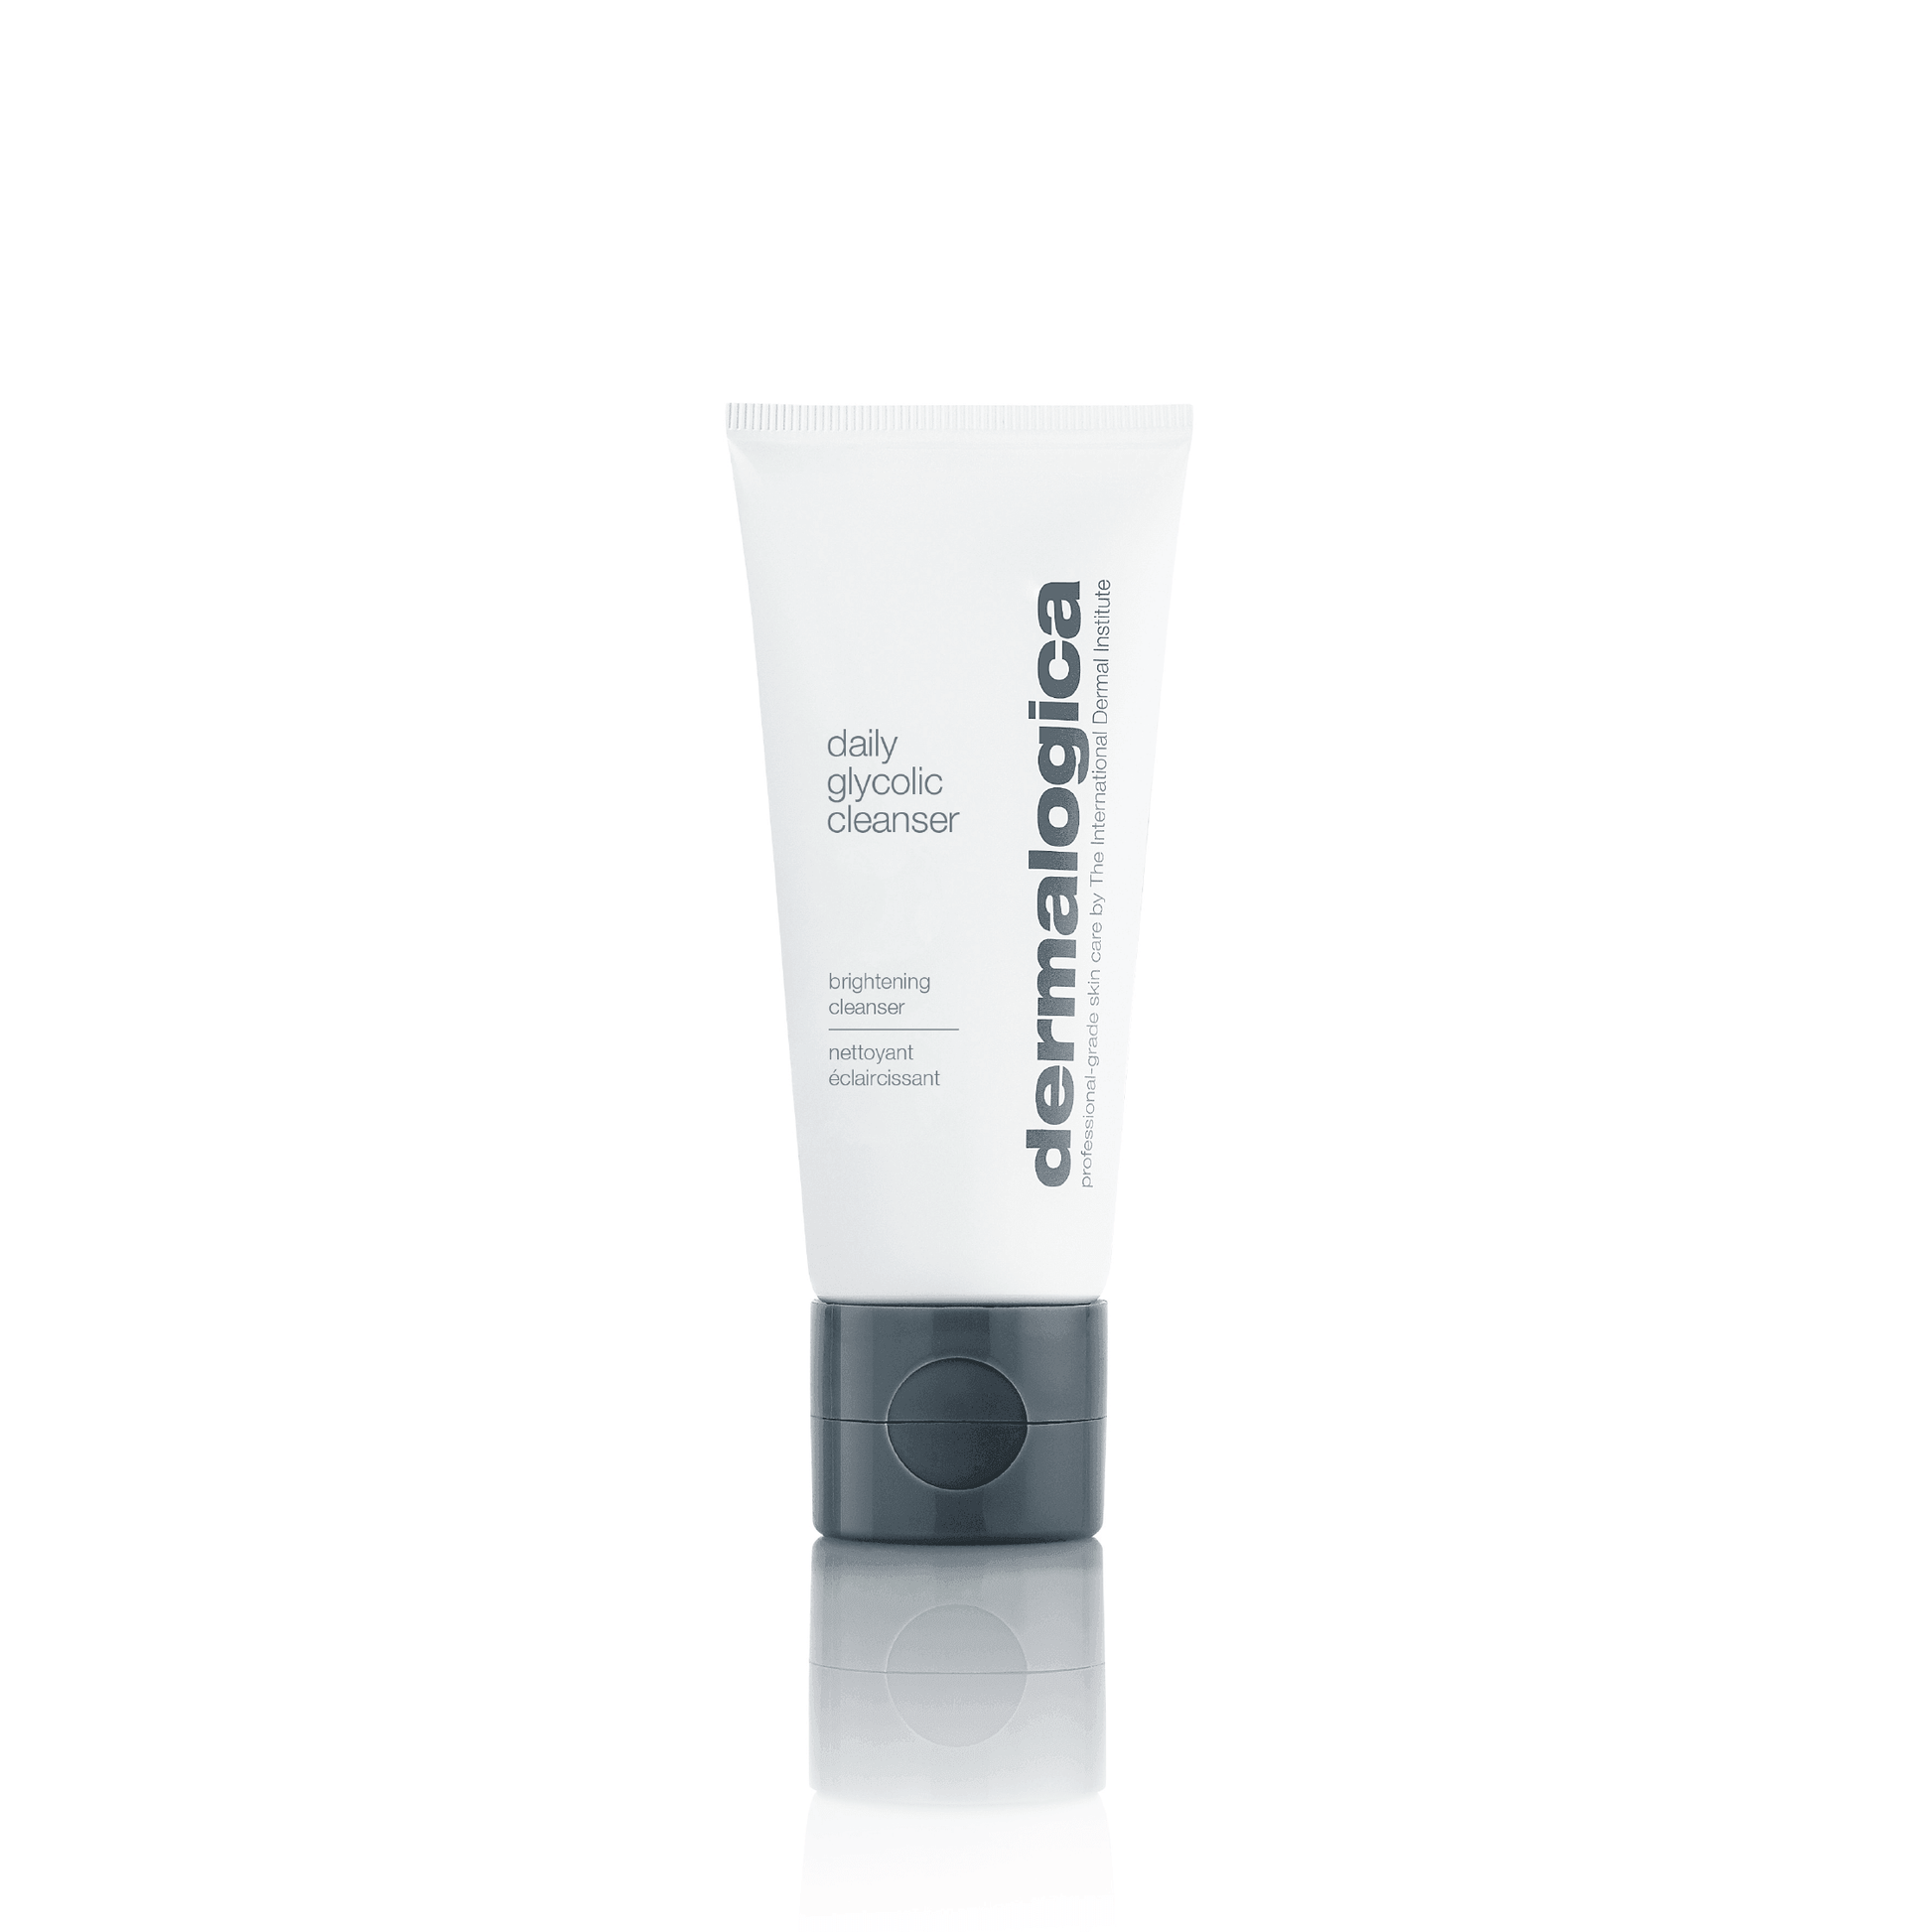 daily glycolic cleanser trial 10ml - Dermalogica Singapore